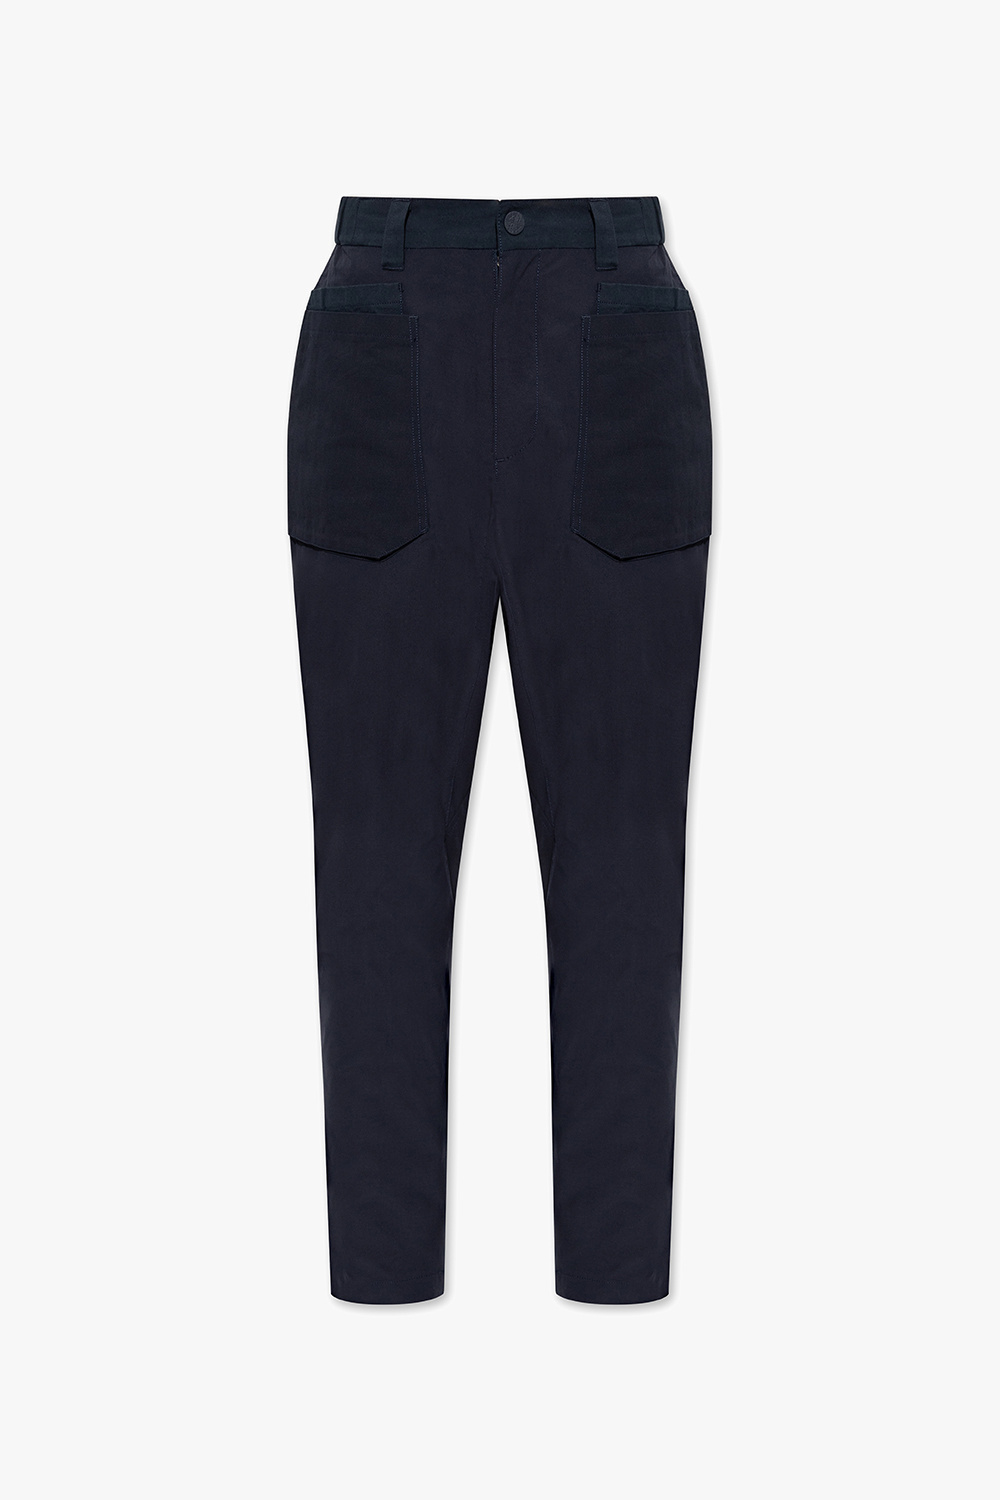 White Mountaineering Trousers with multiple pockets